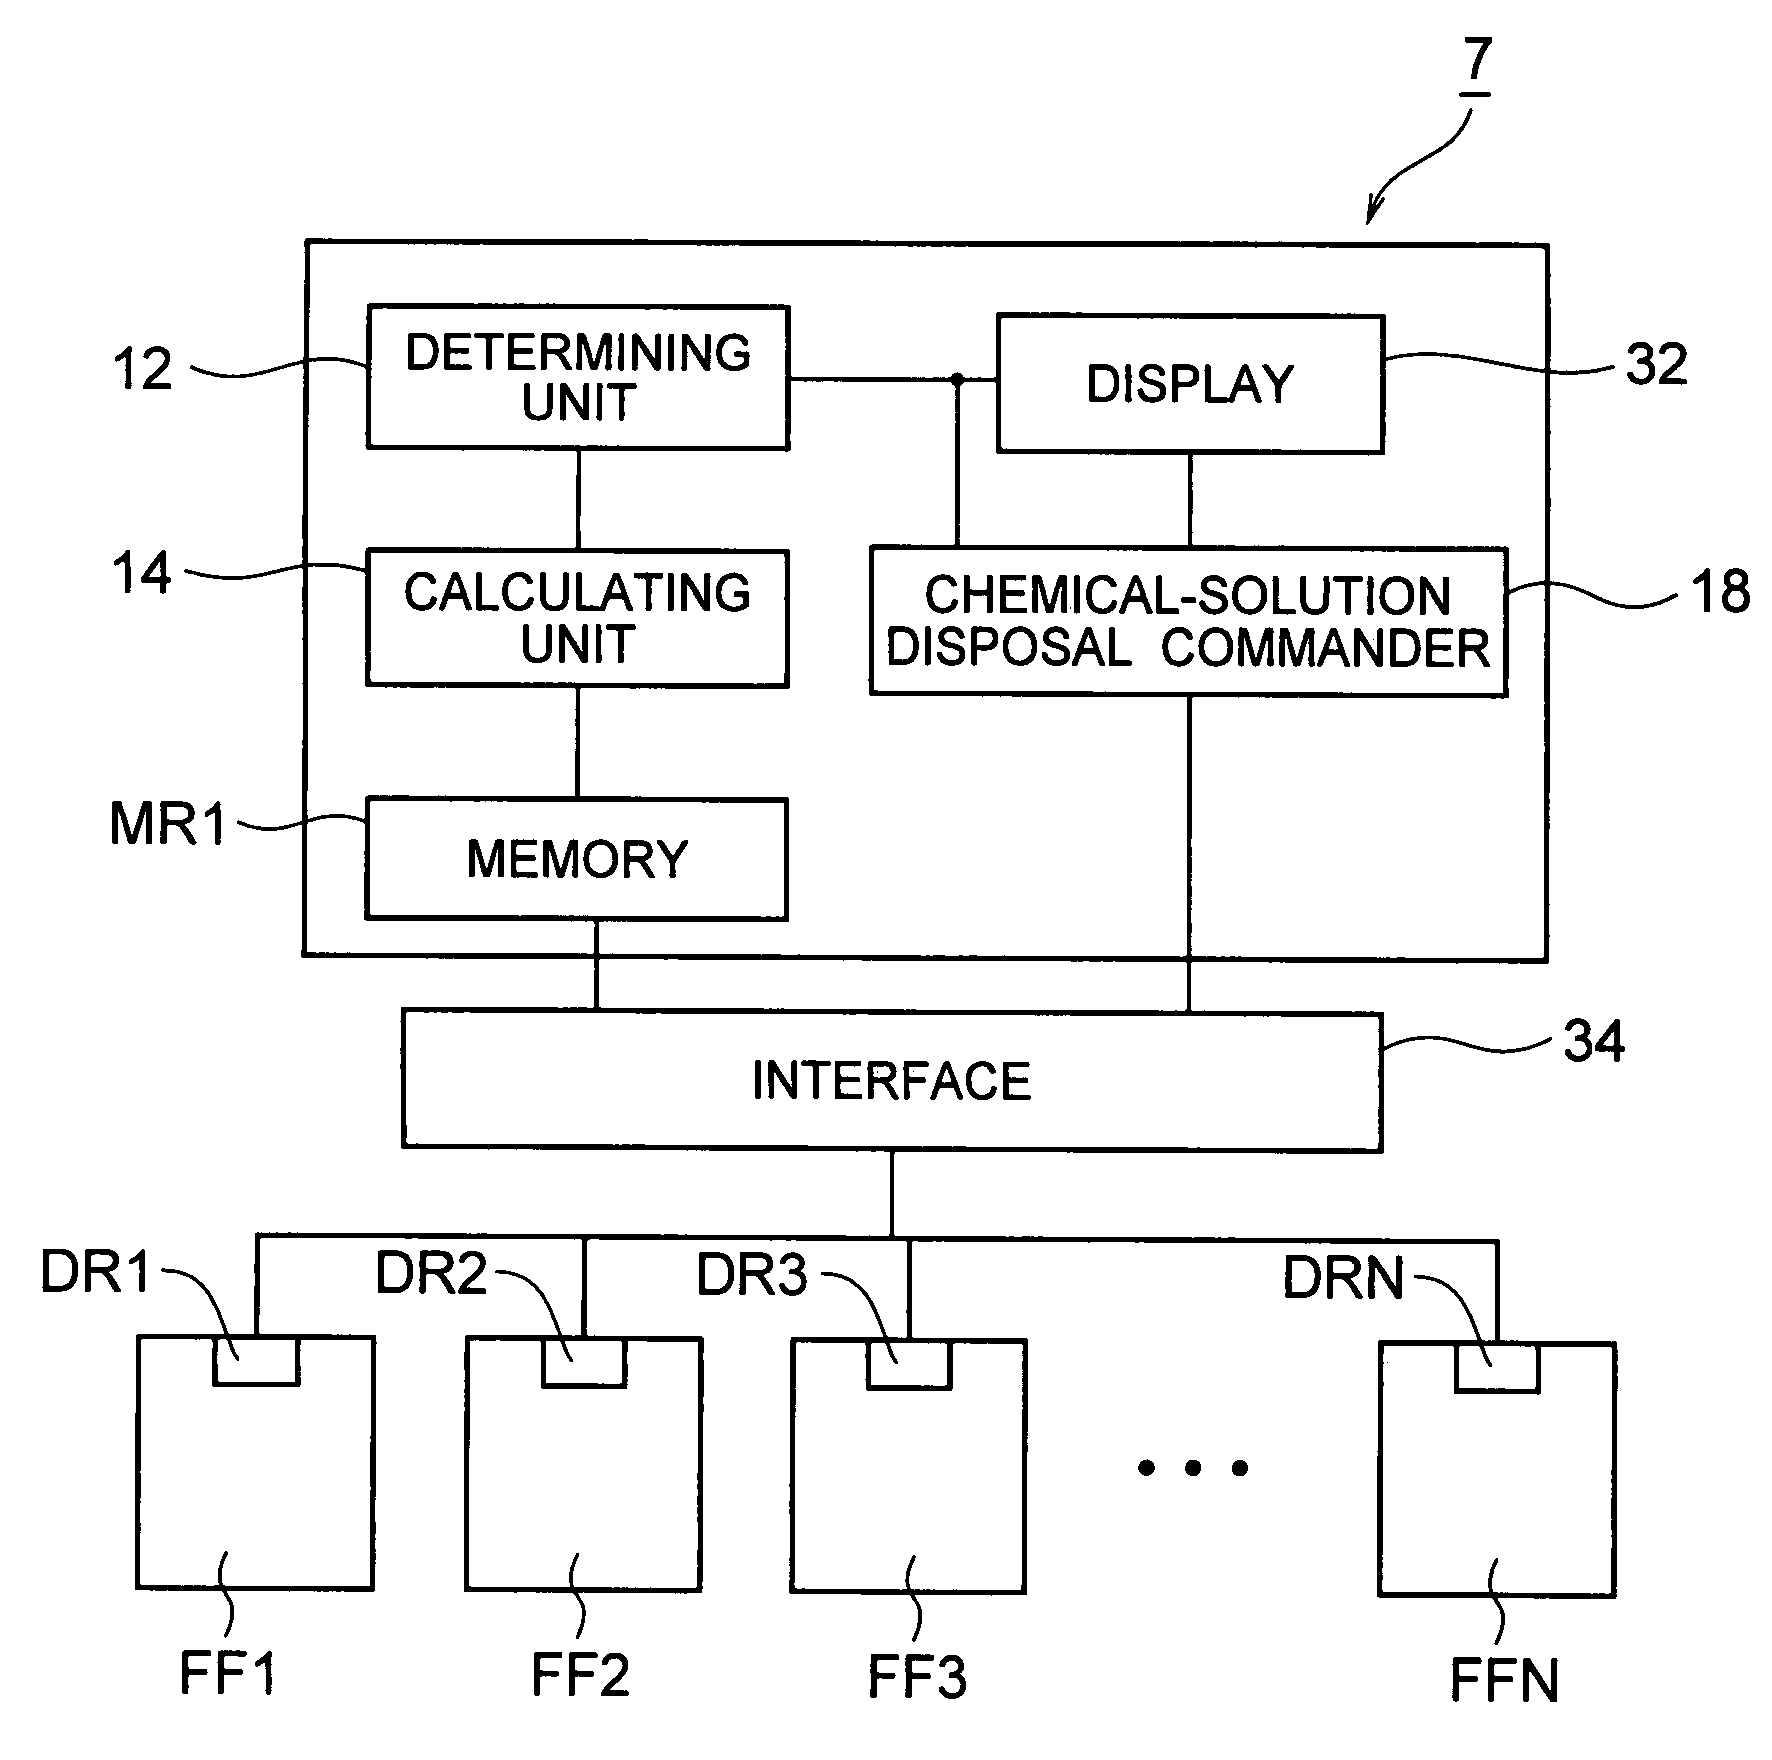 Film forming apparatus, manufacturing management system and method of manufacturing semiconductor devices